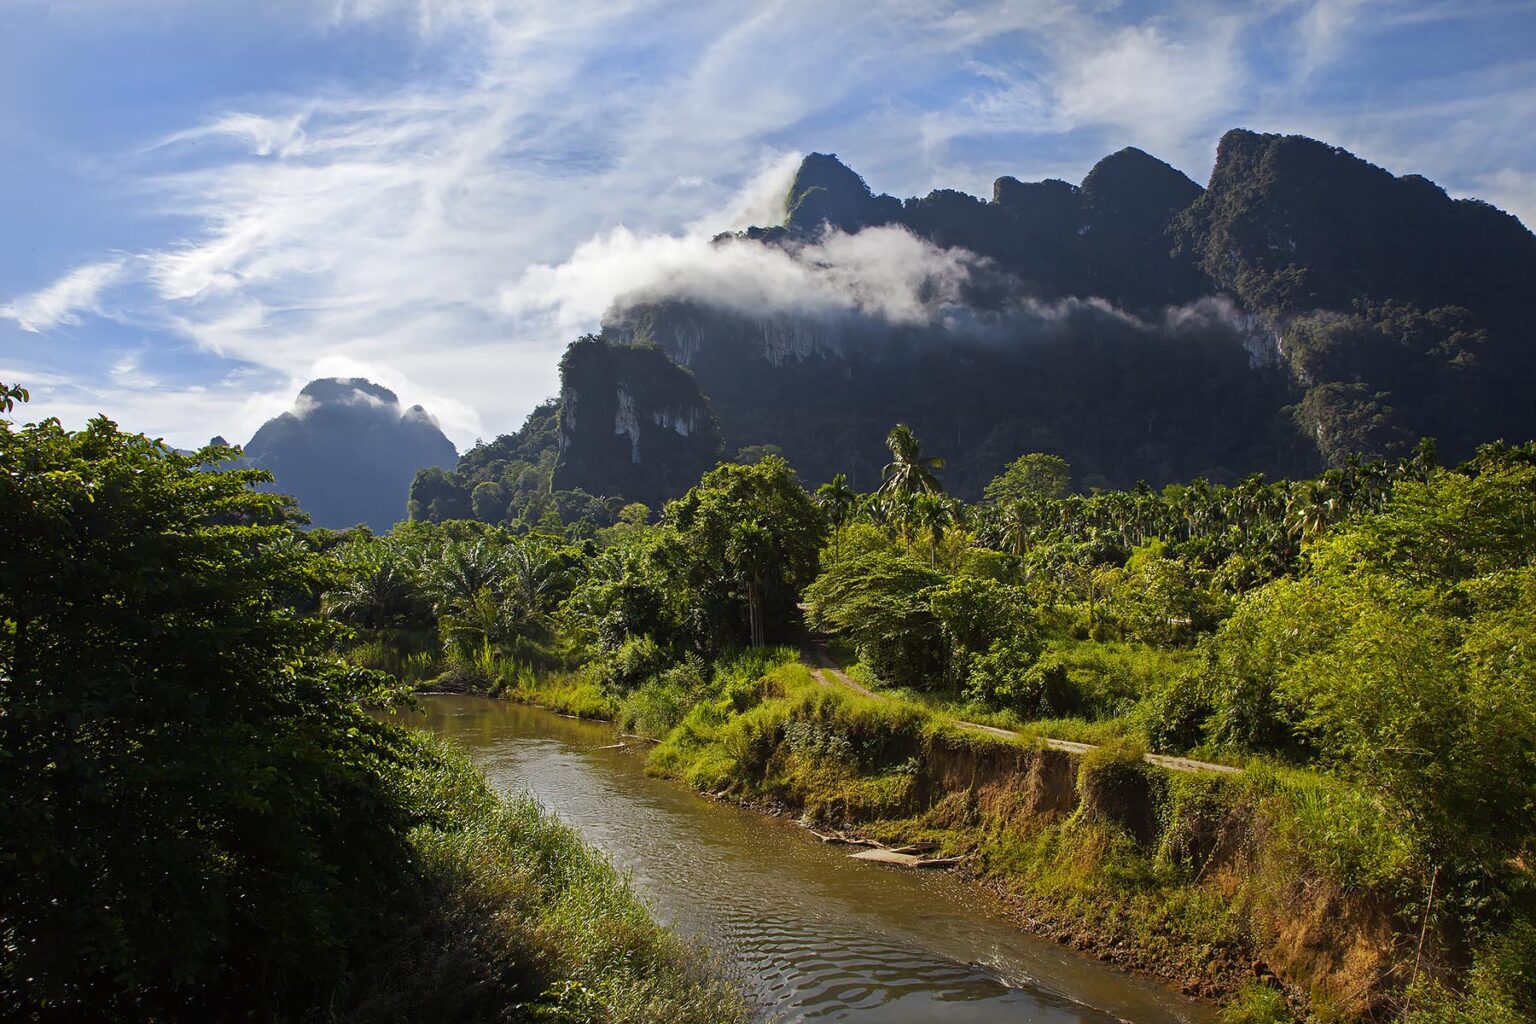 A river runs through the rainforest as mist lingers in the KARST FORMATION just outside KHAO SOK NATIONAL PARK - SURAI THANI PROVENCE, THAILAND